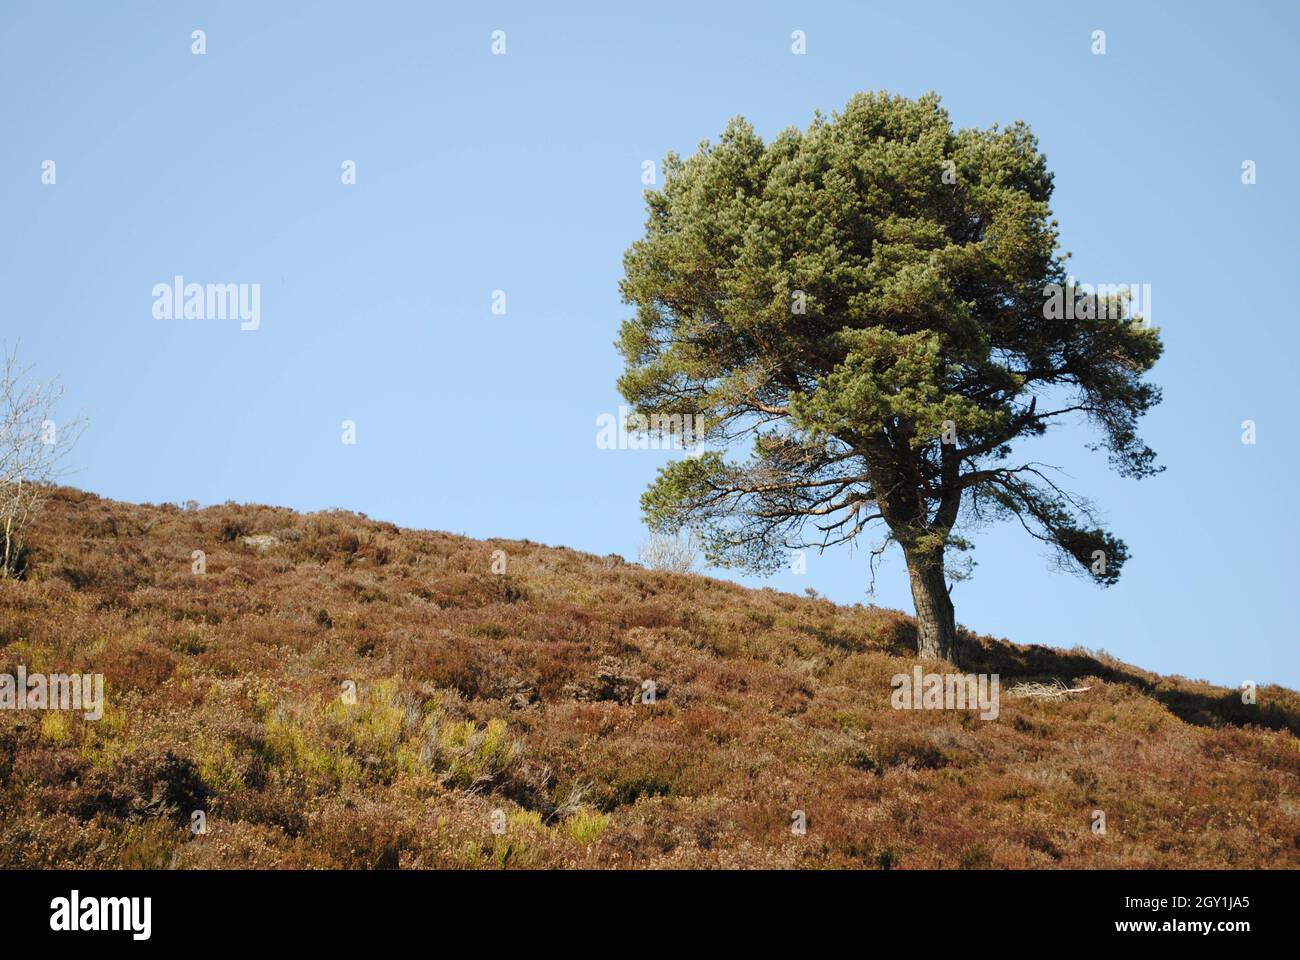 Tree On a Hill Stock Photo